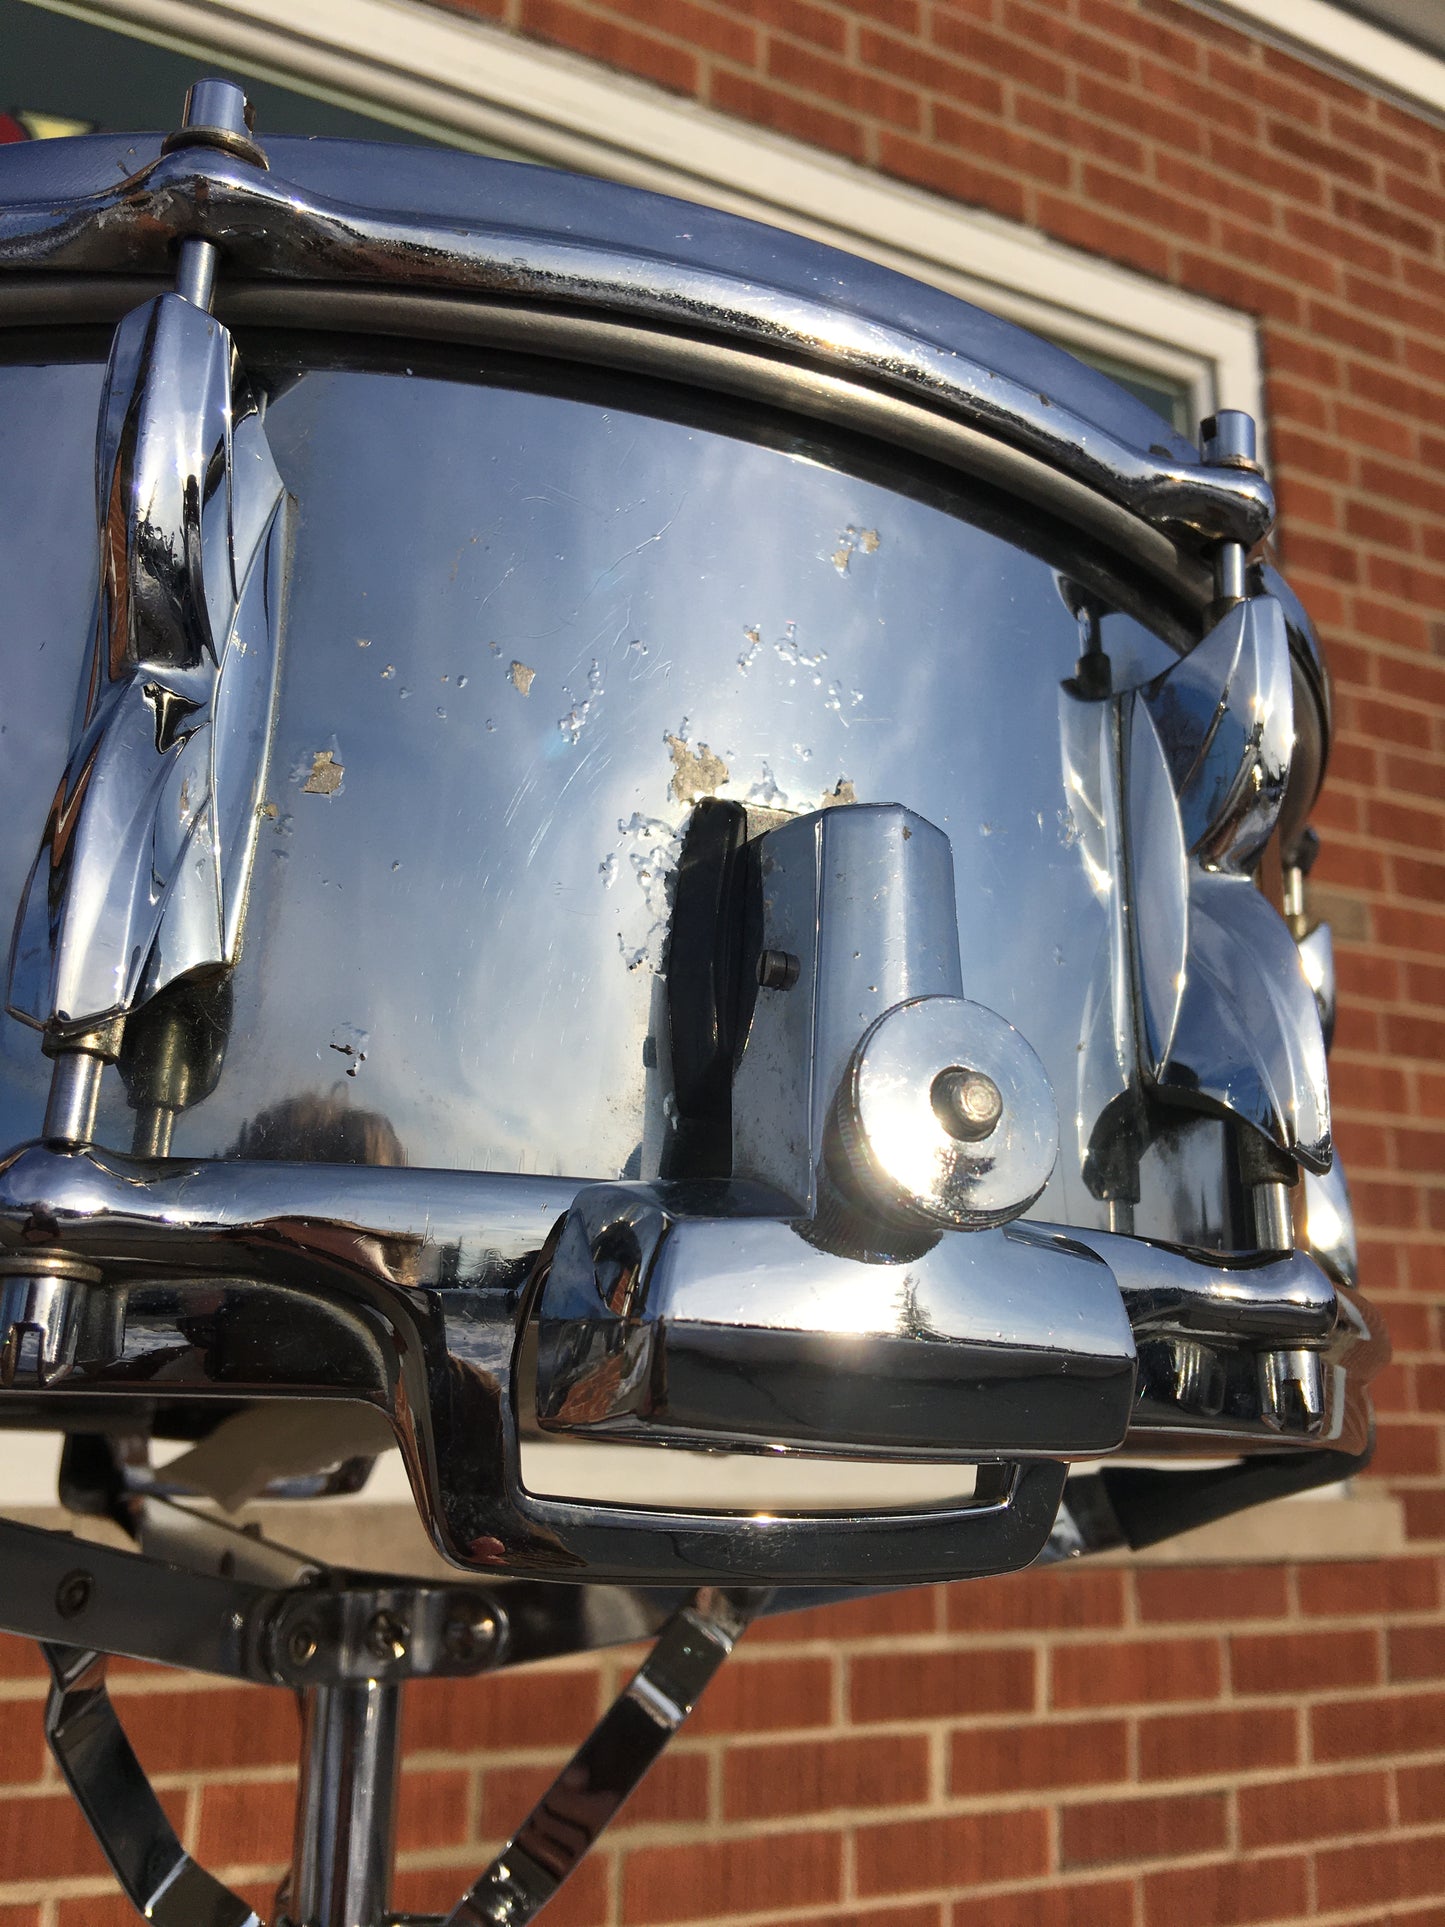 1970s Premier 5.5x14 Model 2000 Snare Drum Chrome Over Aluminum Made in England